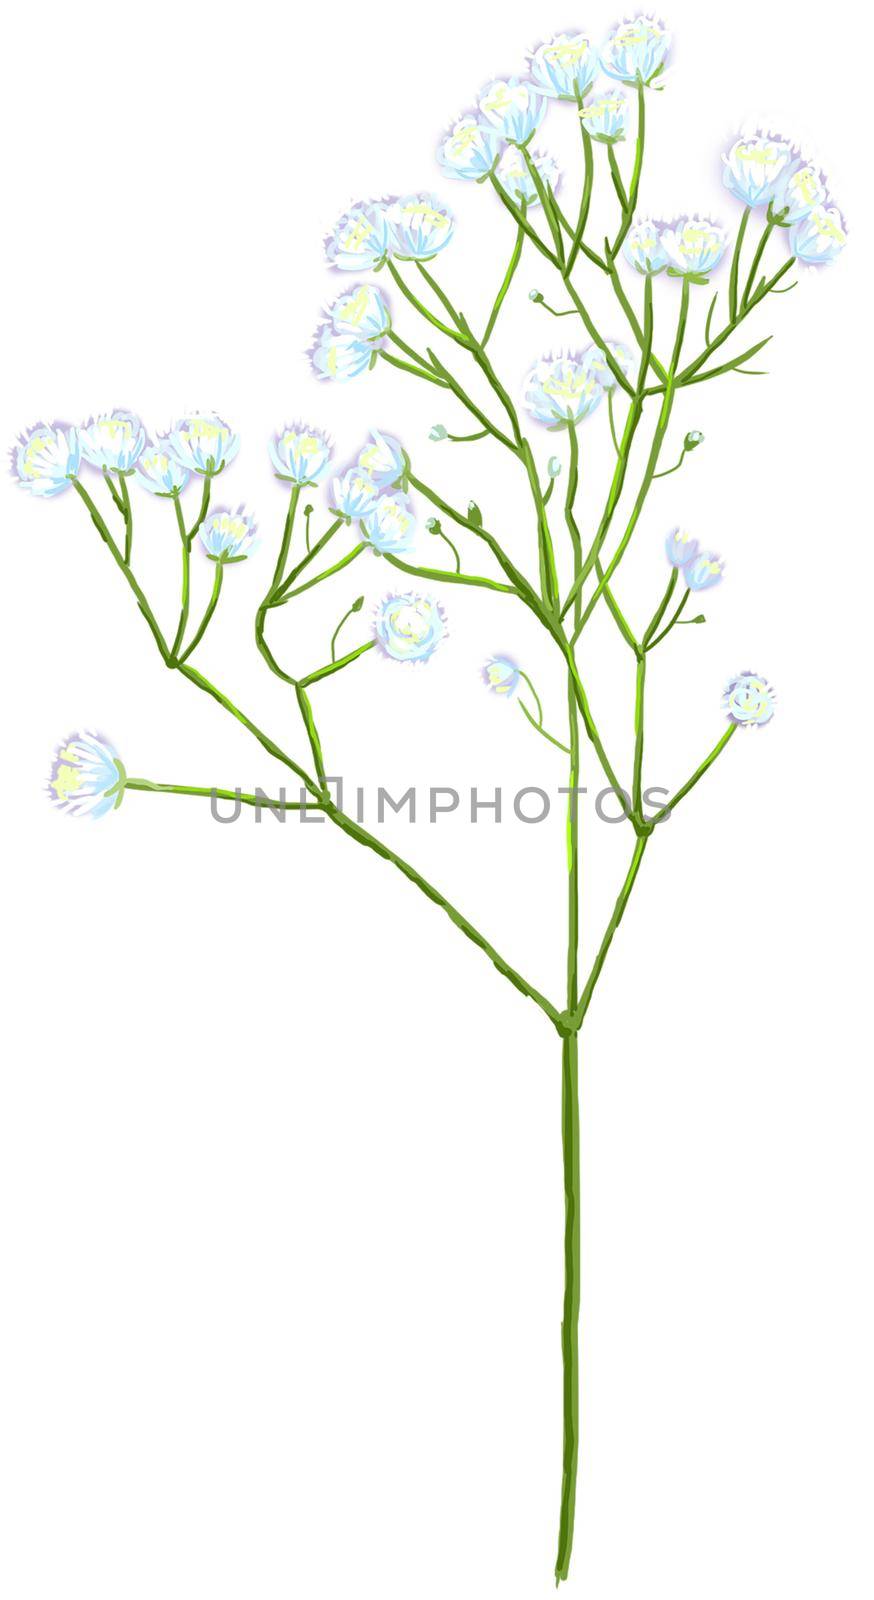 Watercolor illustration gypsophila with little white flowers by NataOmsk